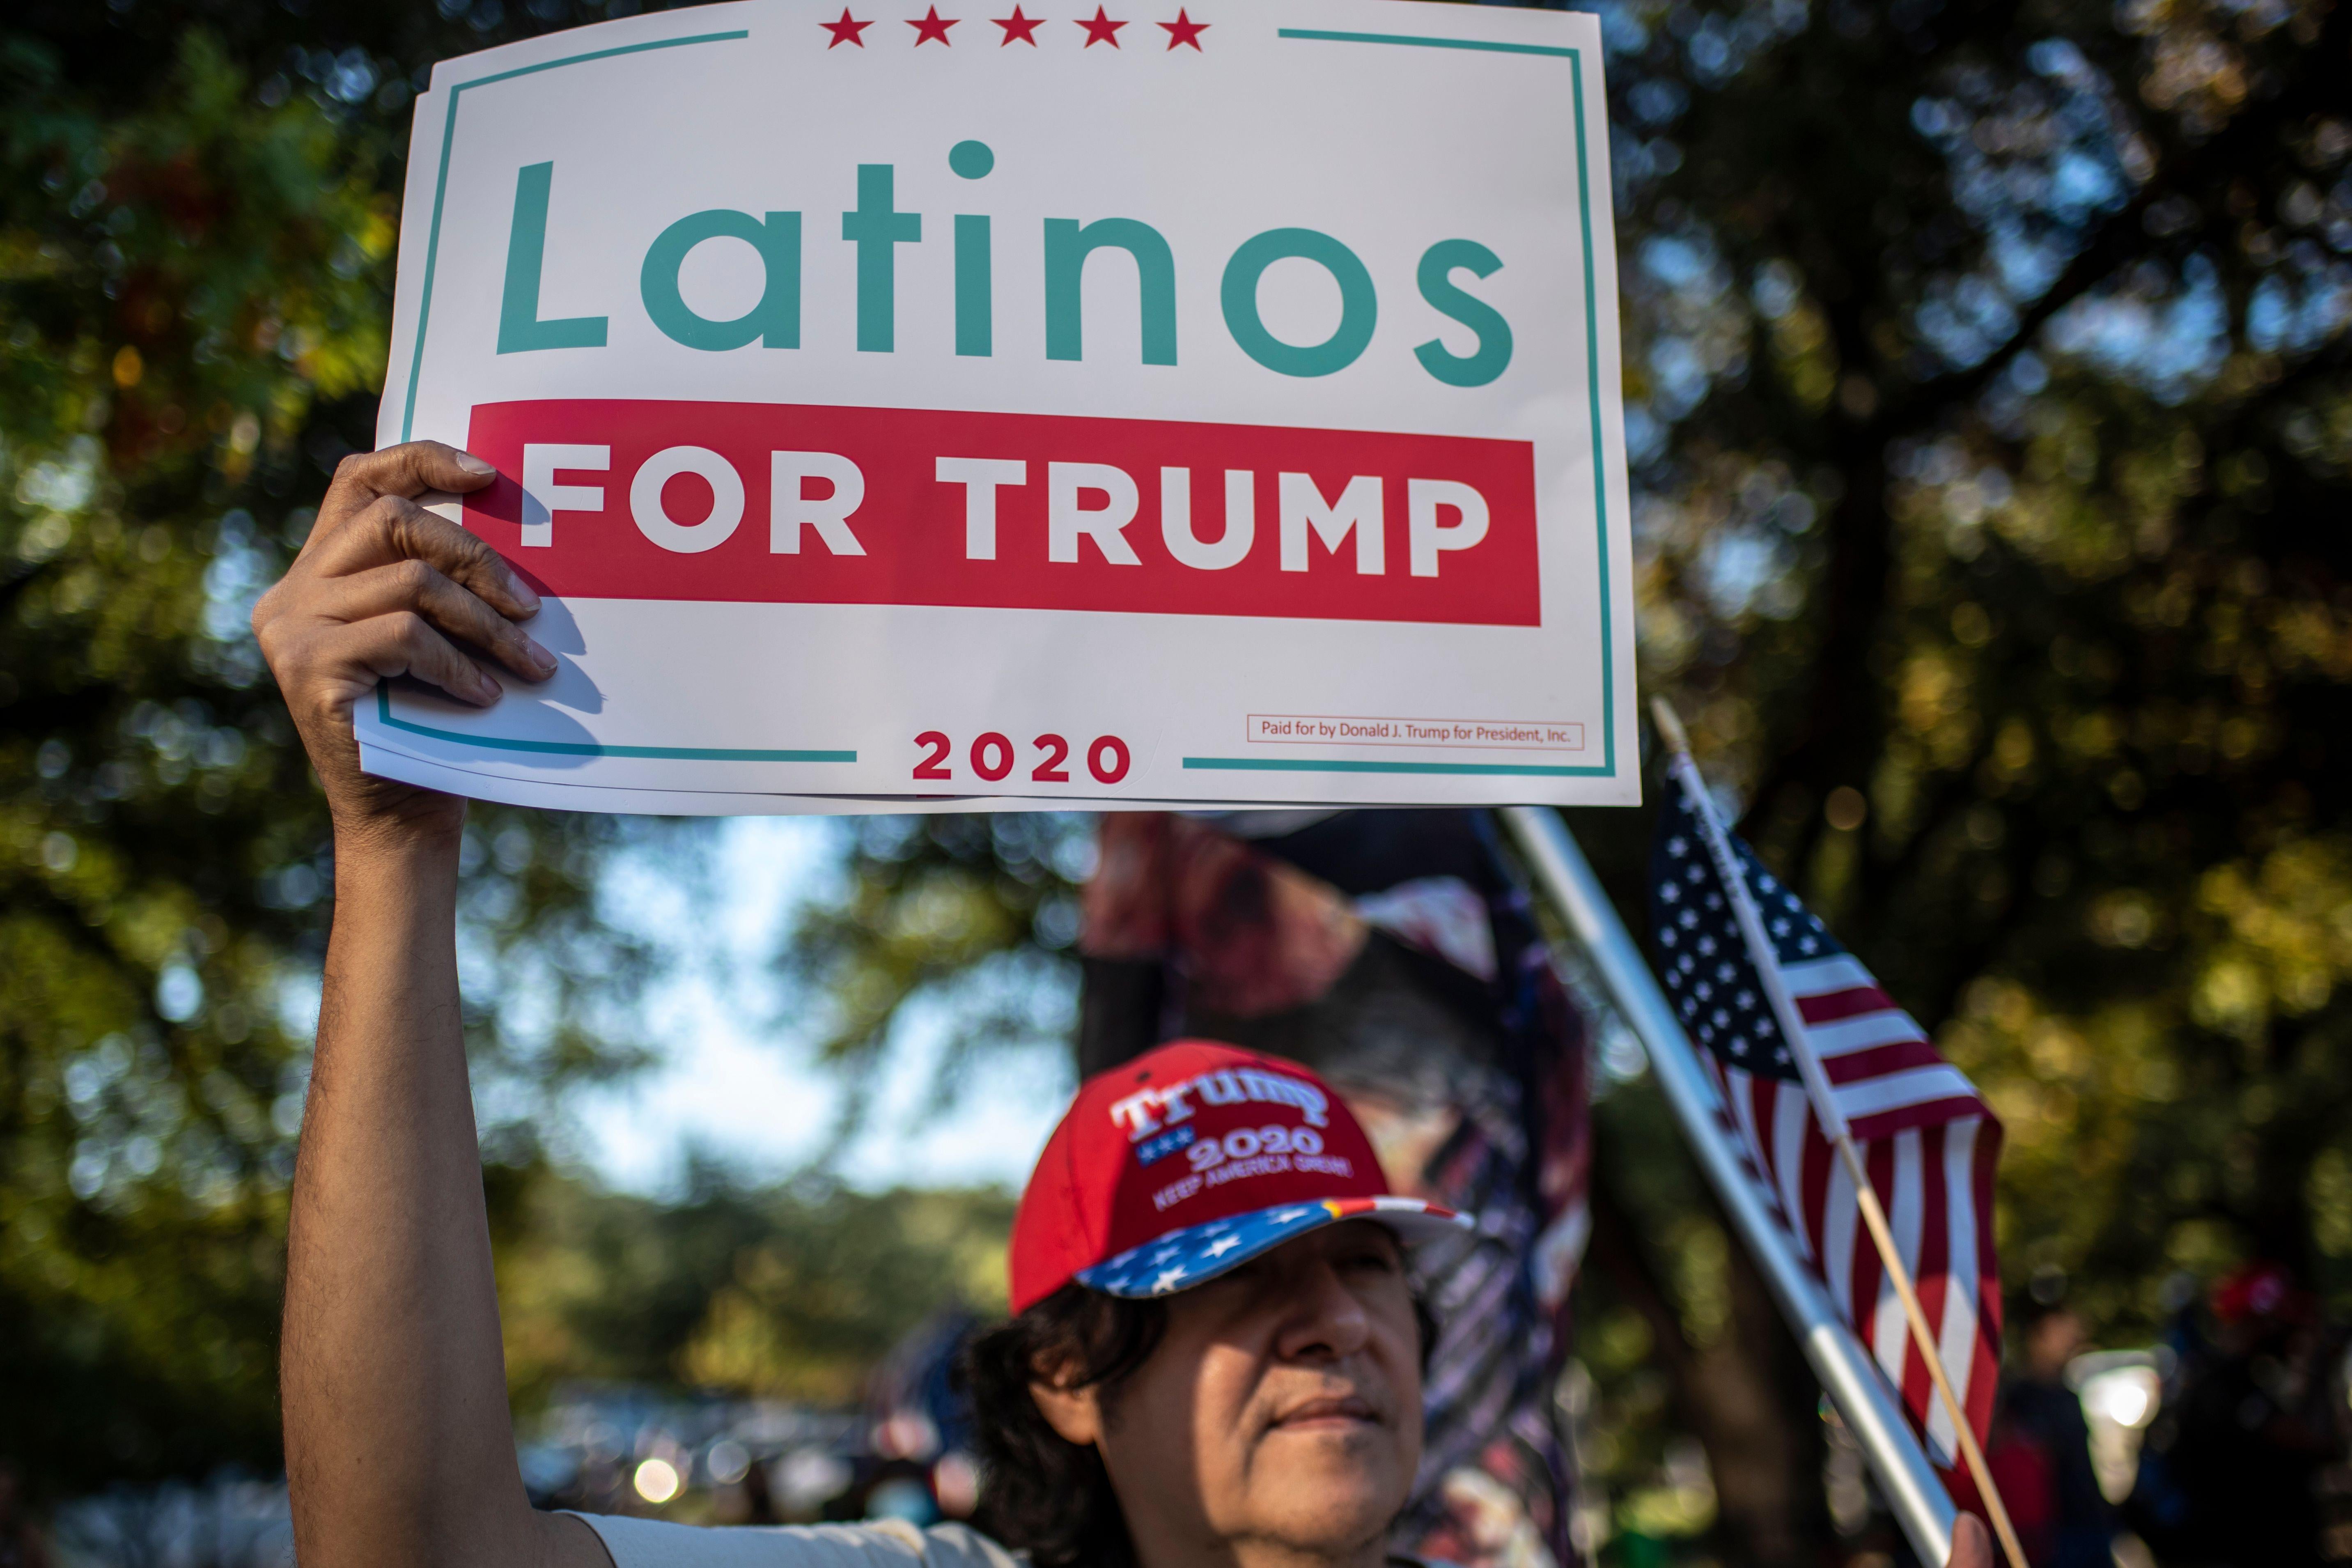 A man holds up a "Latinos for Trump" sign.